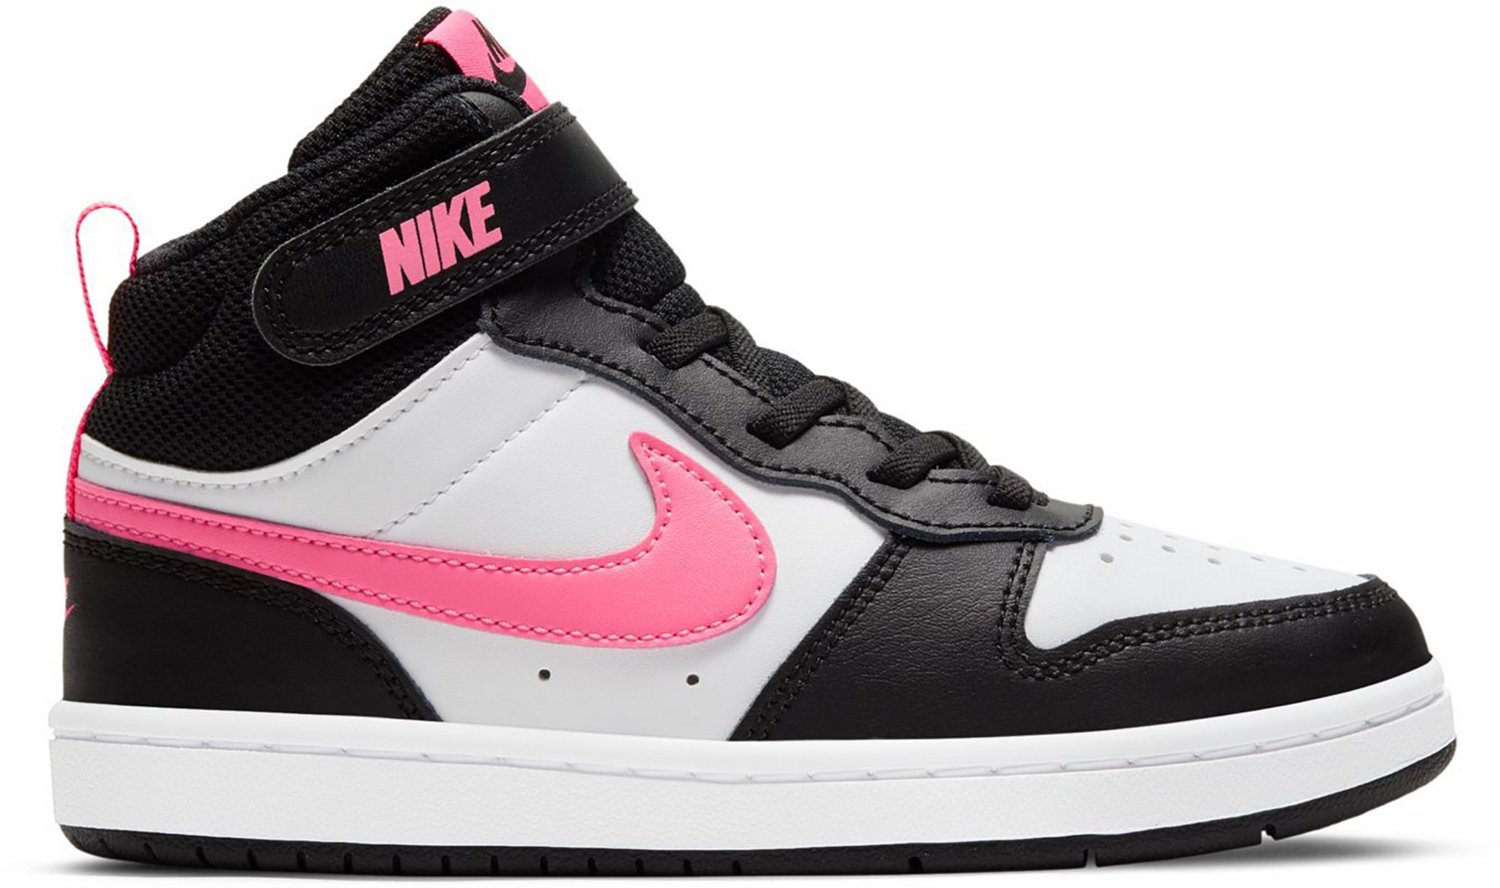 Nike Girls' Court Borough Mid 2 Shoes | Free Shipping at Academy